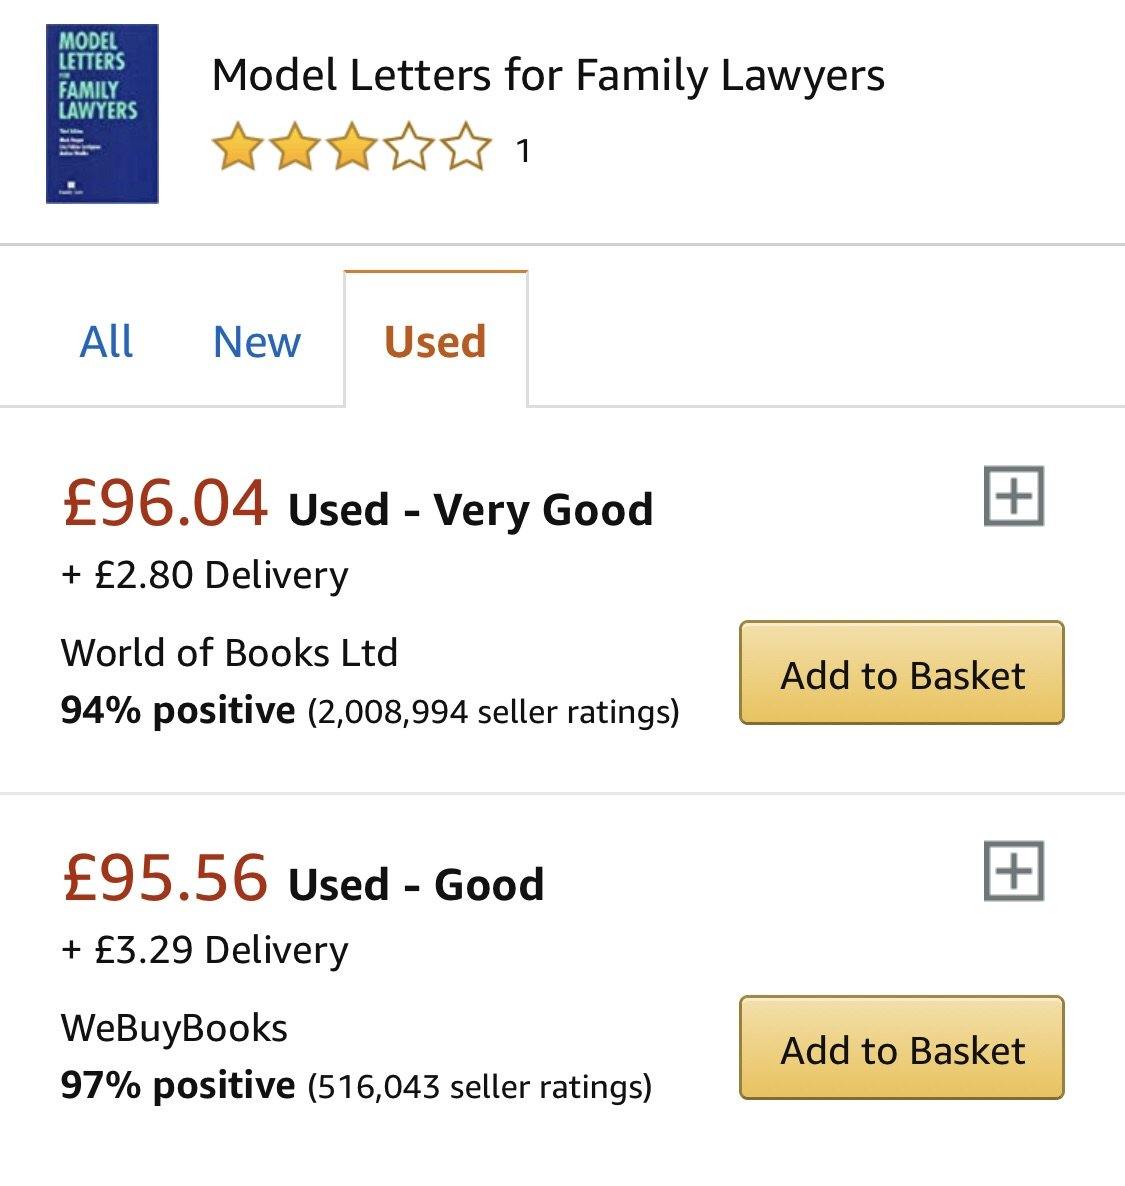 Model Letters for Family Lawyers - Belfast Books